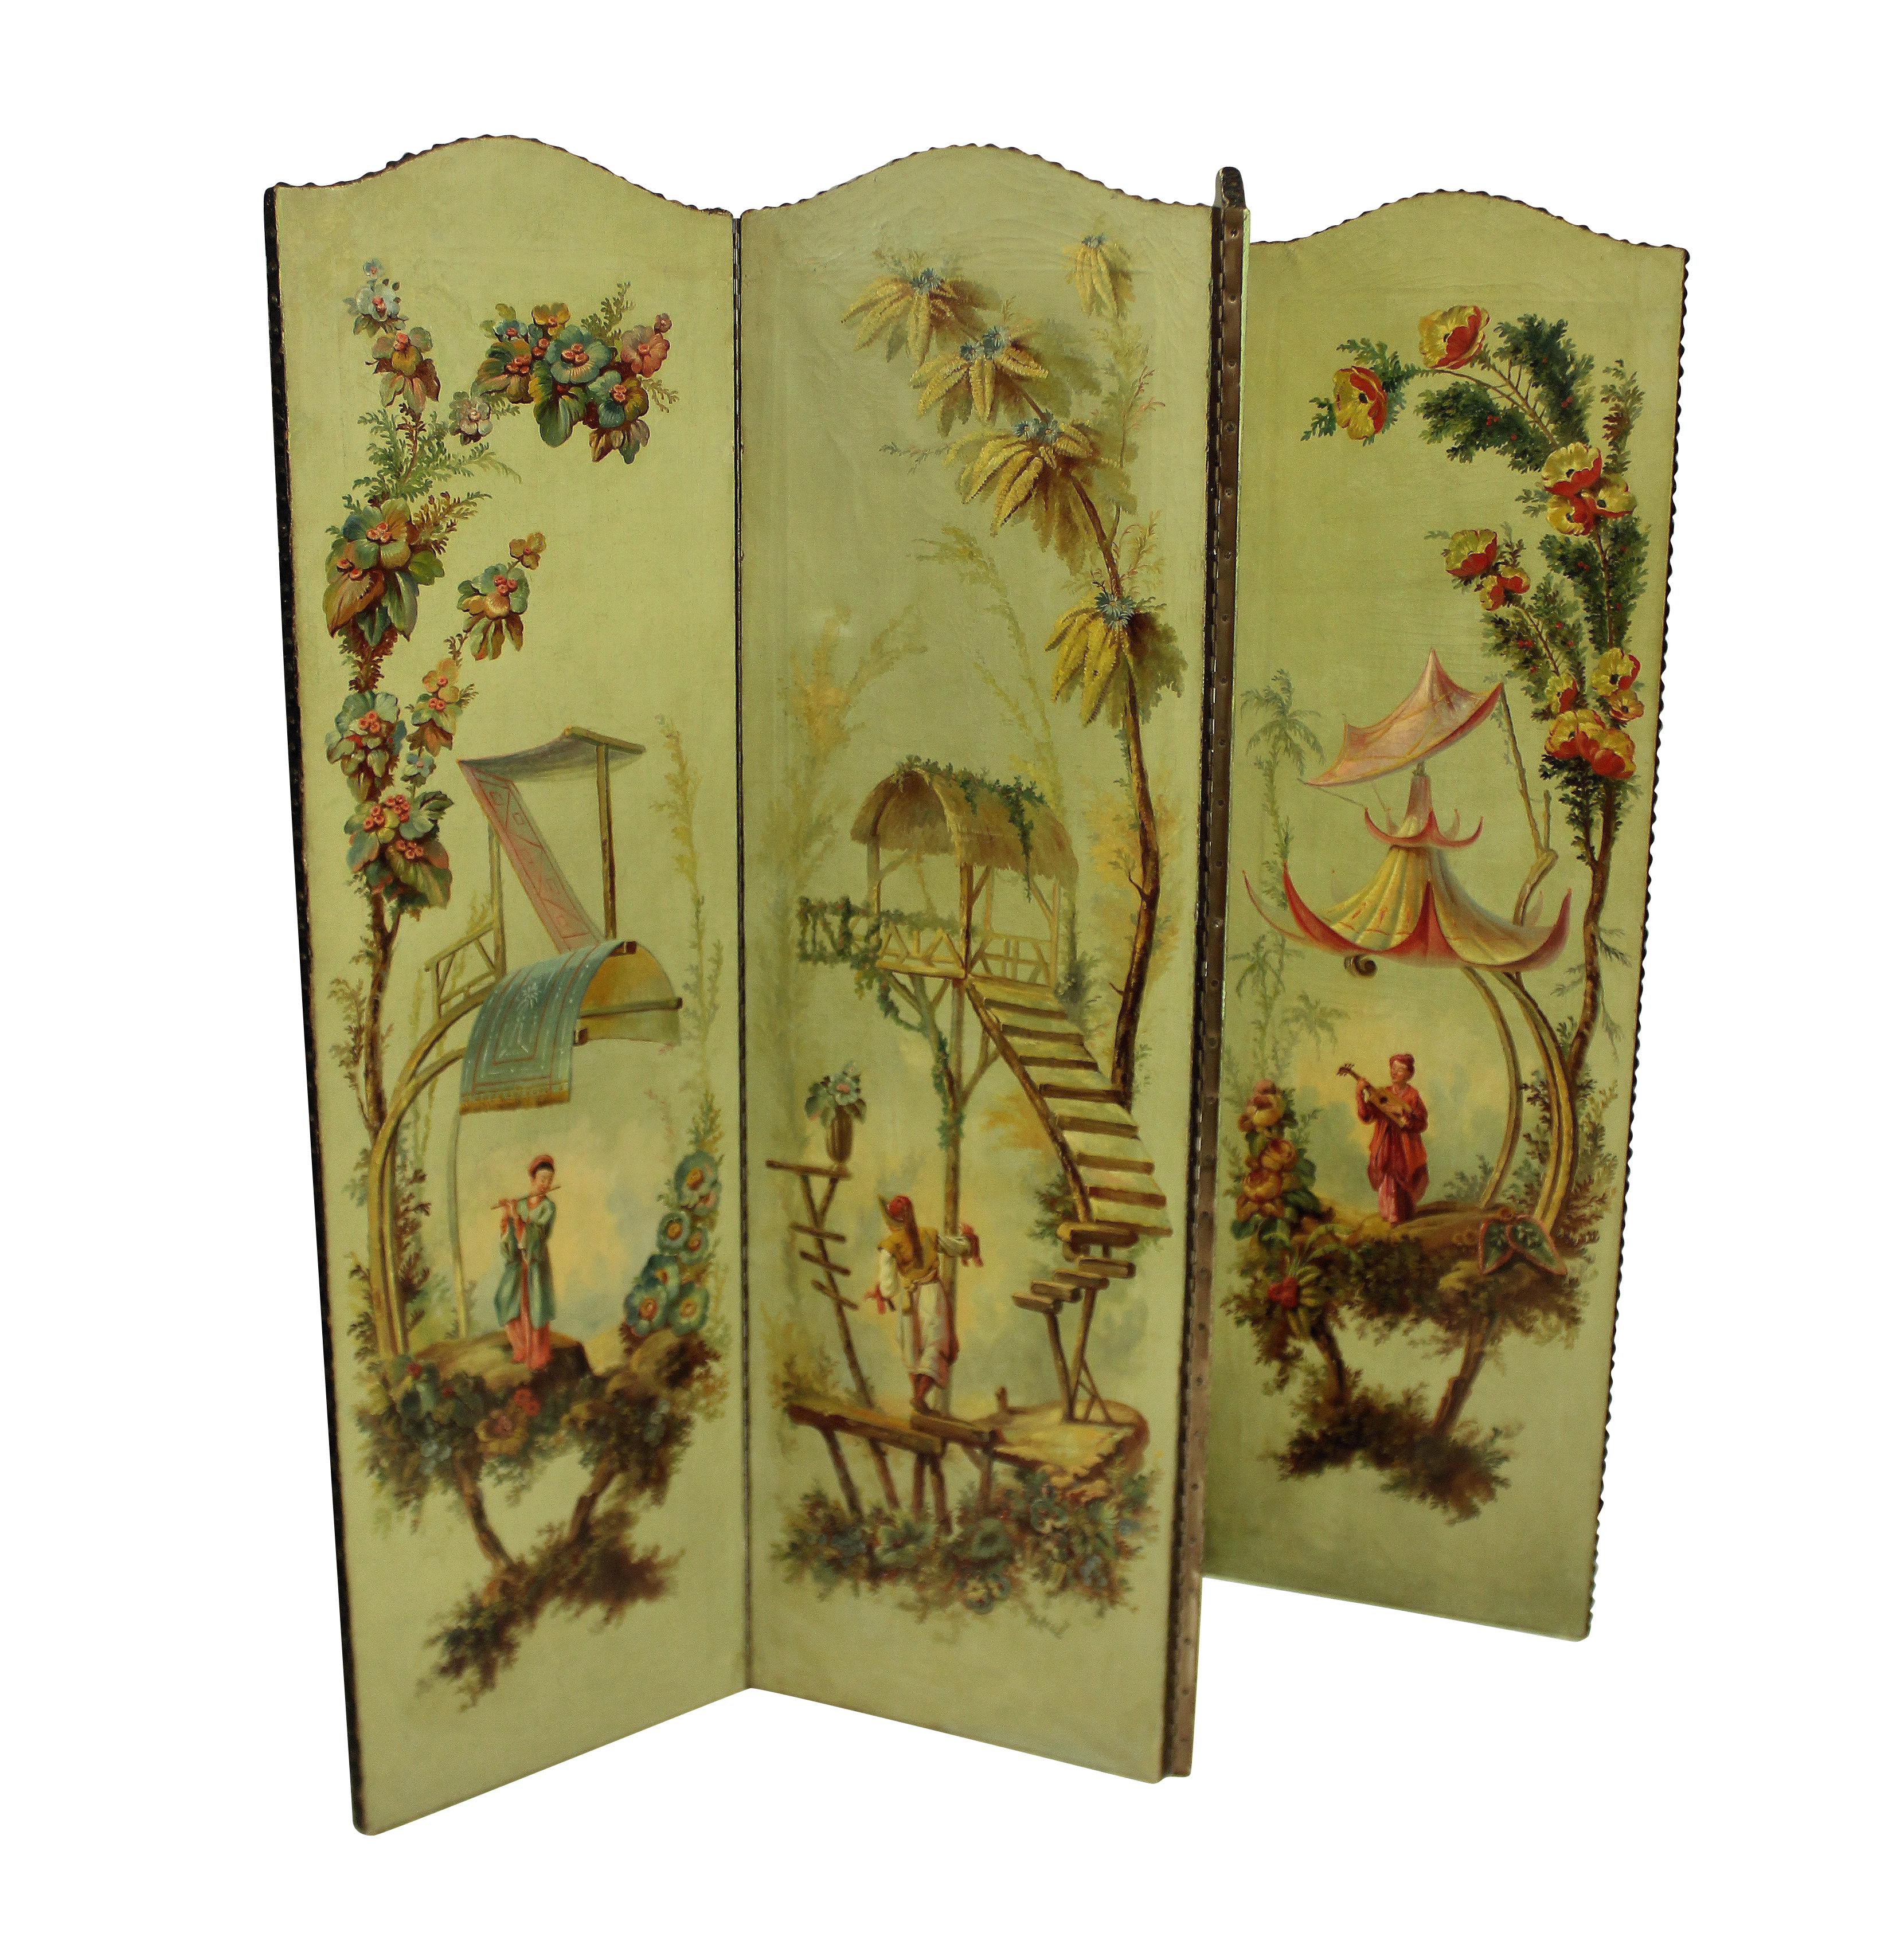 An English hand painted chinoiserie four fold screen. With an oil on canvas eau de nil background, painted with oriental scenes. In good condition.